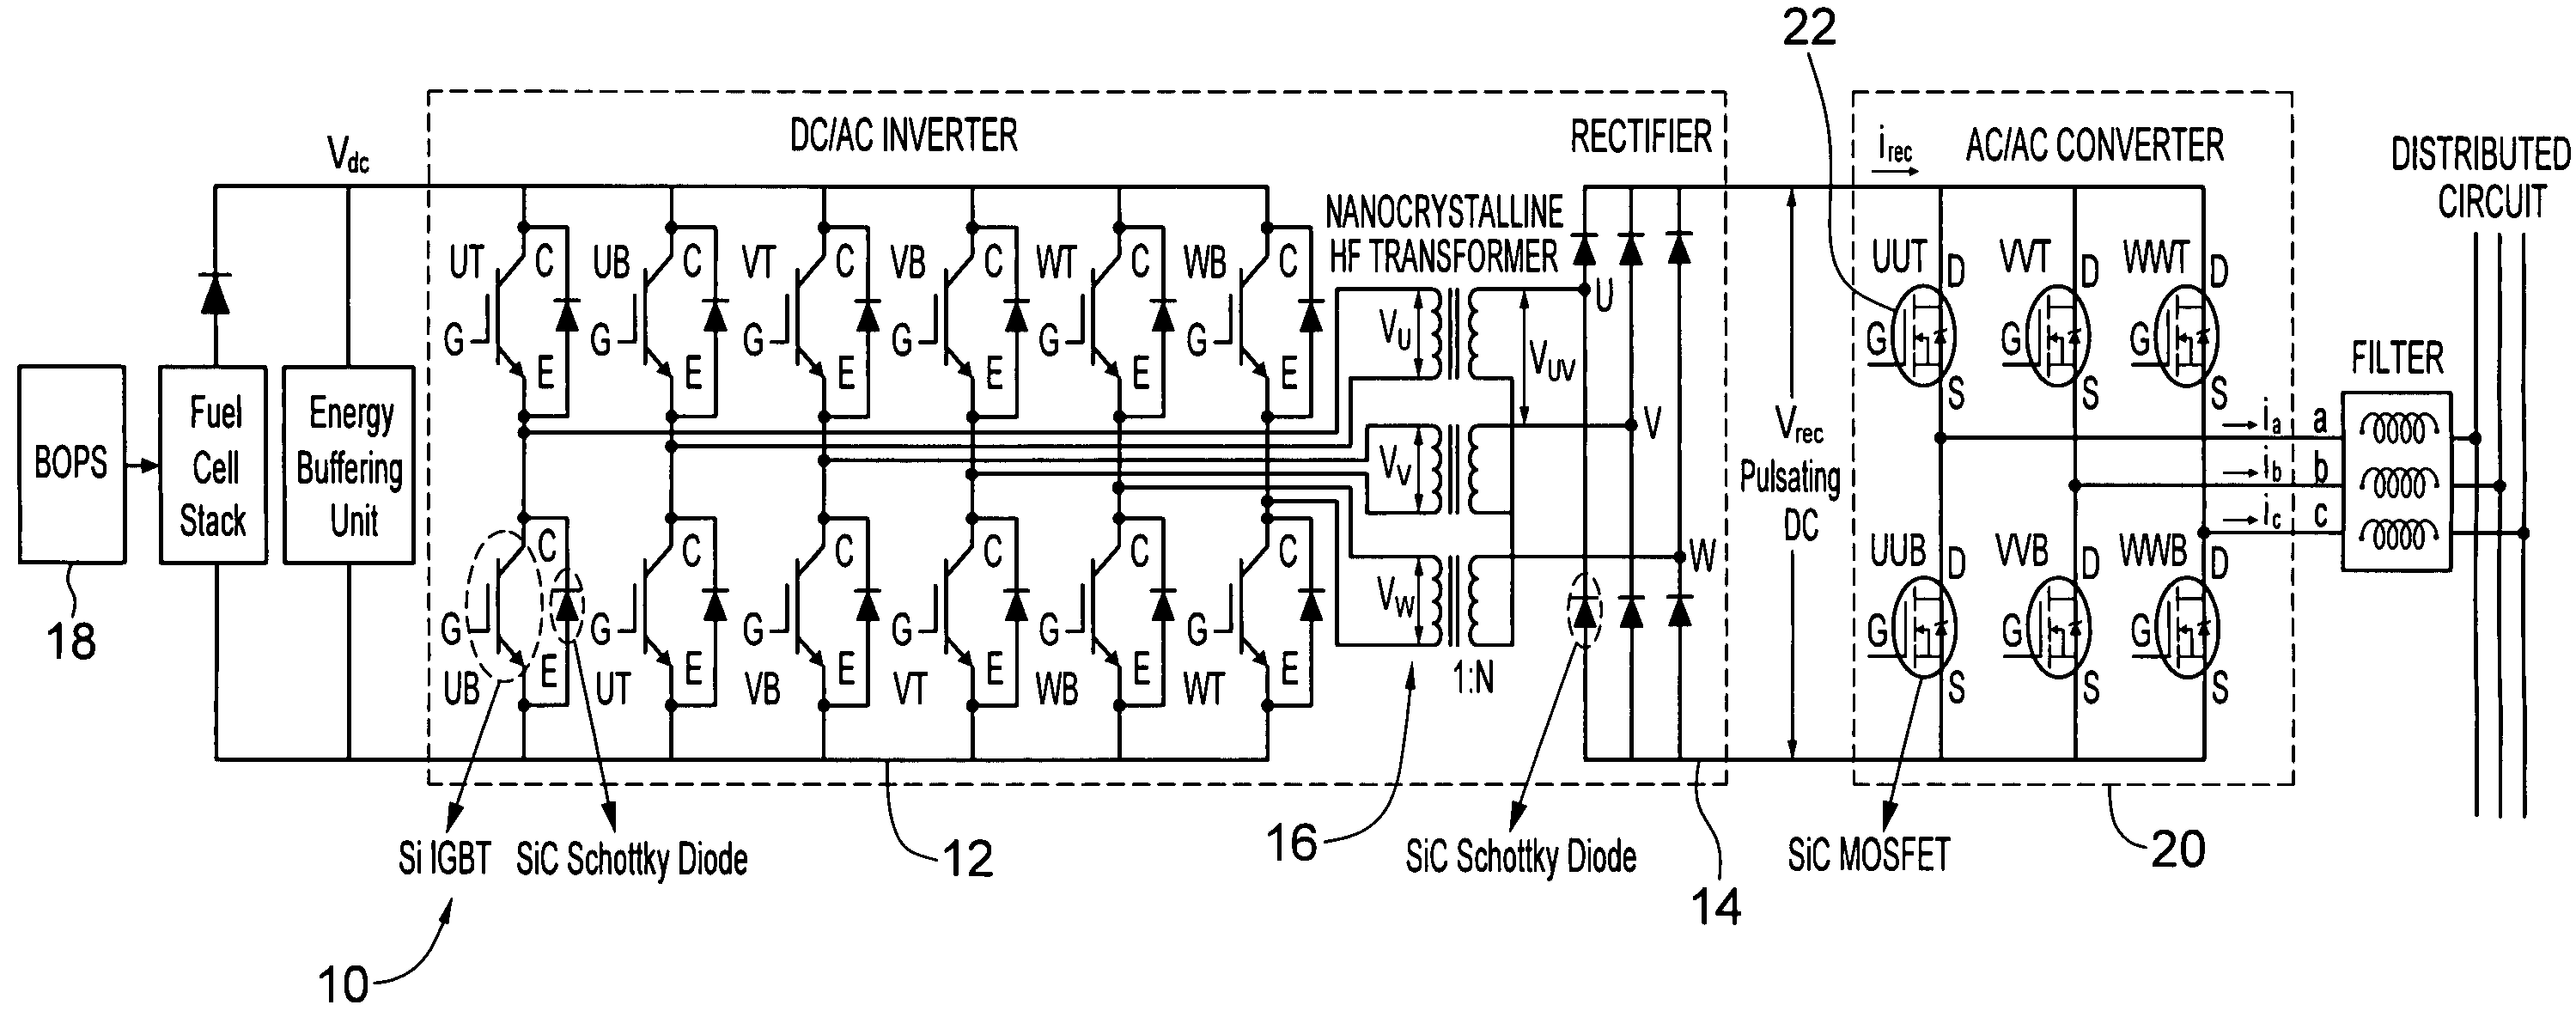 Multiphase converter apparatus and method